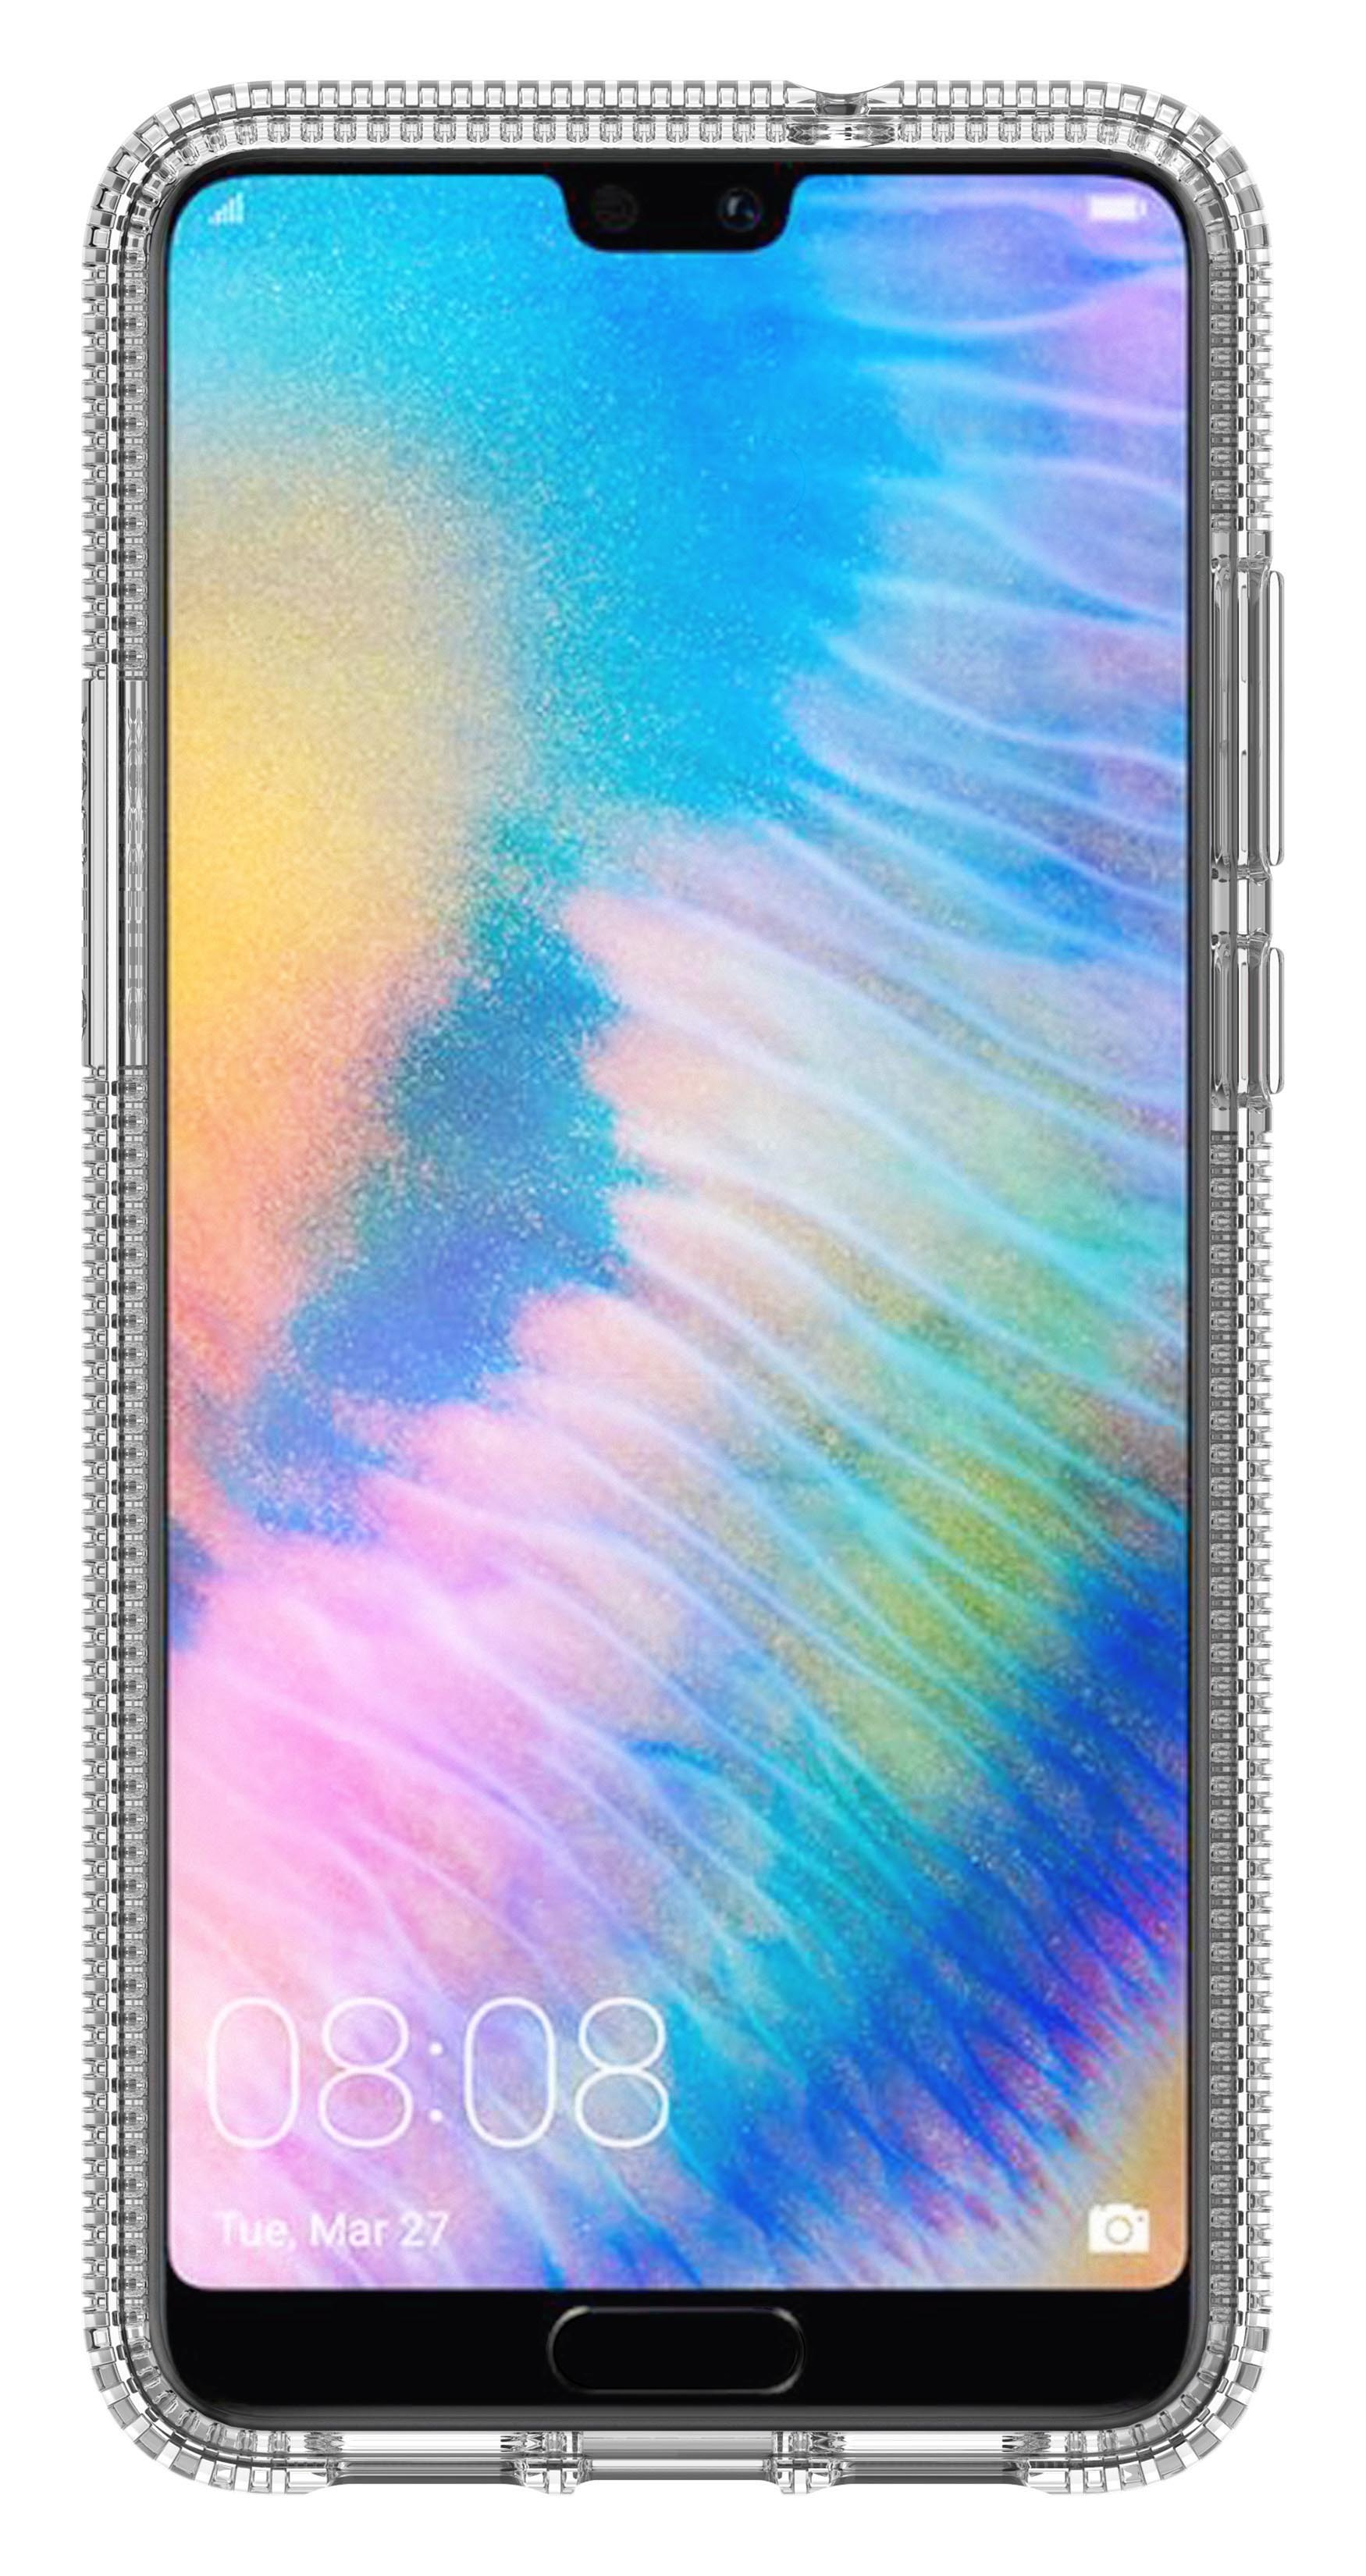 OTTERBOX Prefix Clear, P20, Transparent Huawei, Backcover